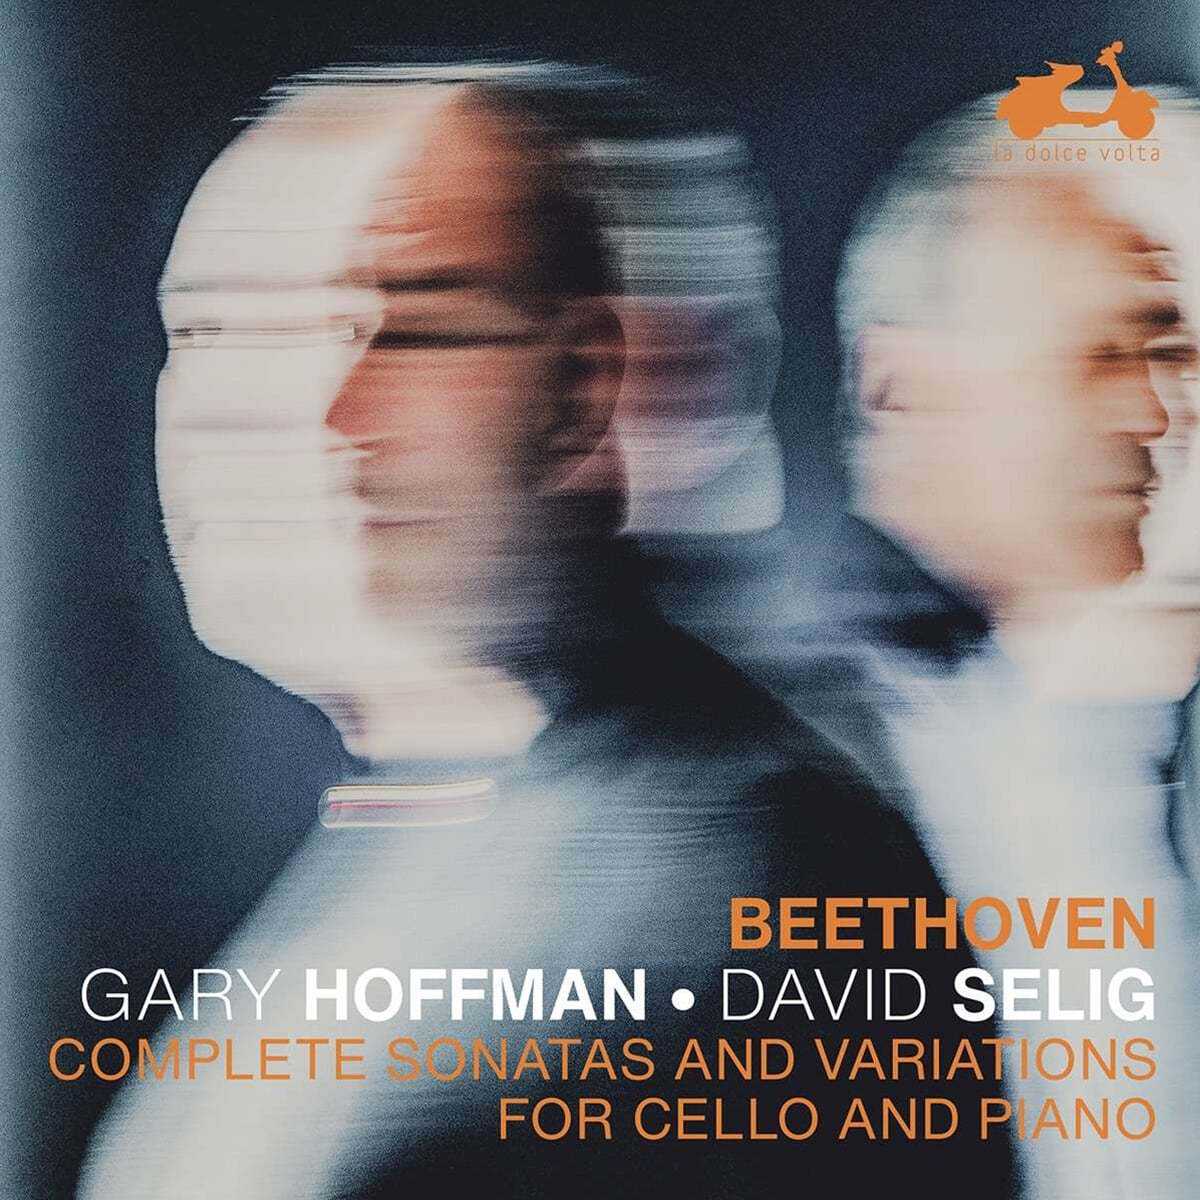 Gary Hoffman / David Selig 베토벤: 첼로 소나타 전곡 (Beethoven: Complete Sonatas and Variations For Cello and Piano)